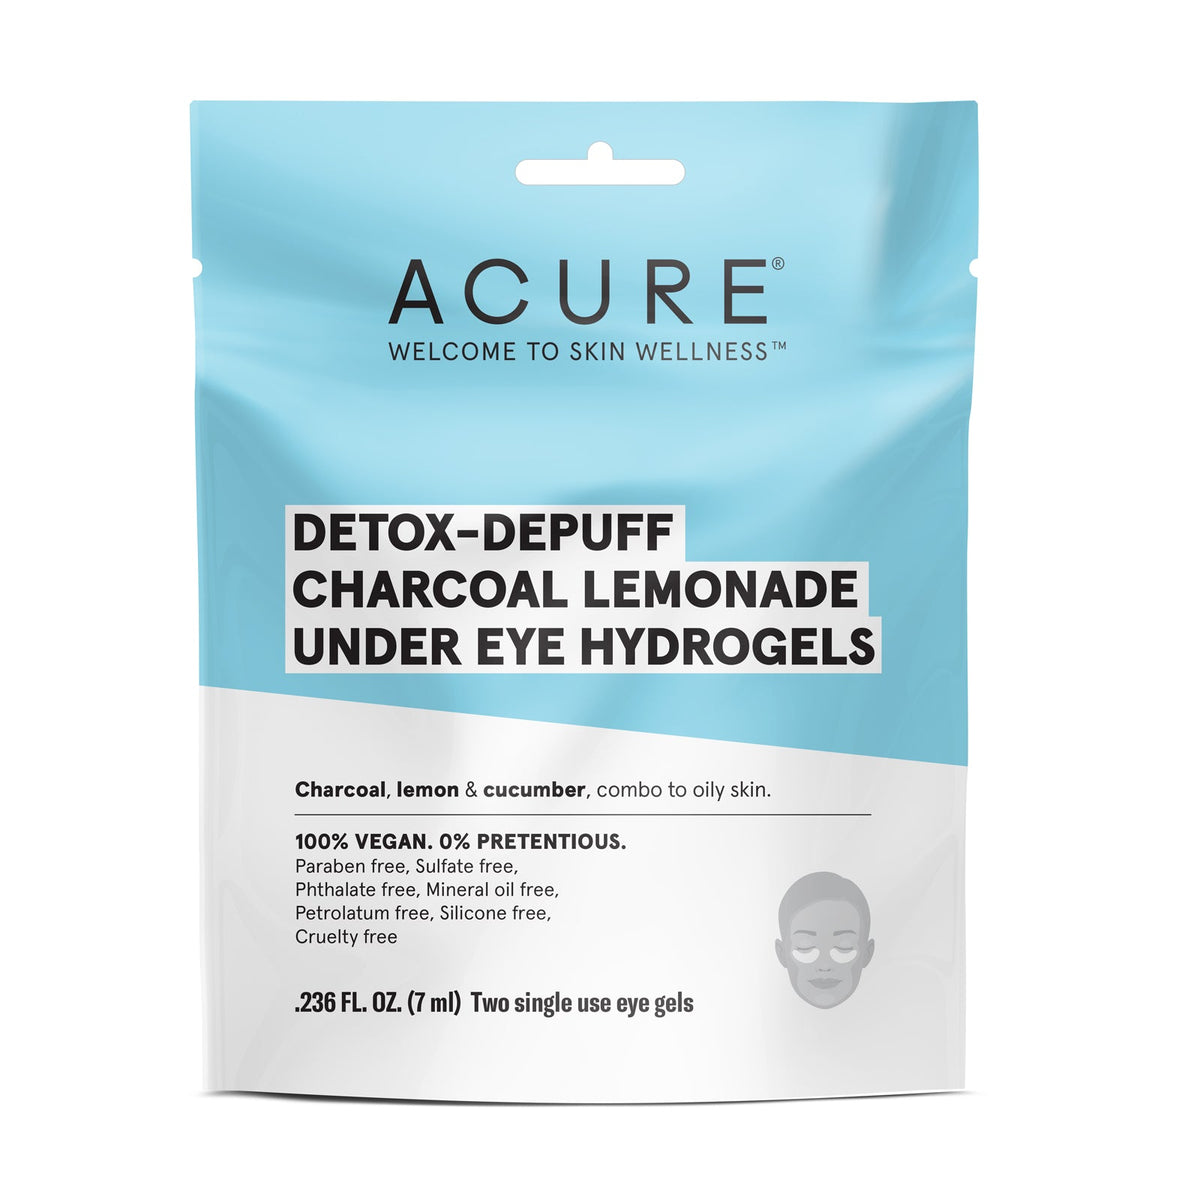 ACURE - Detox-Depuff Chracoal Lemonade Under Eye Hydrogels - ProCare Outlet by Acure